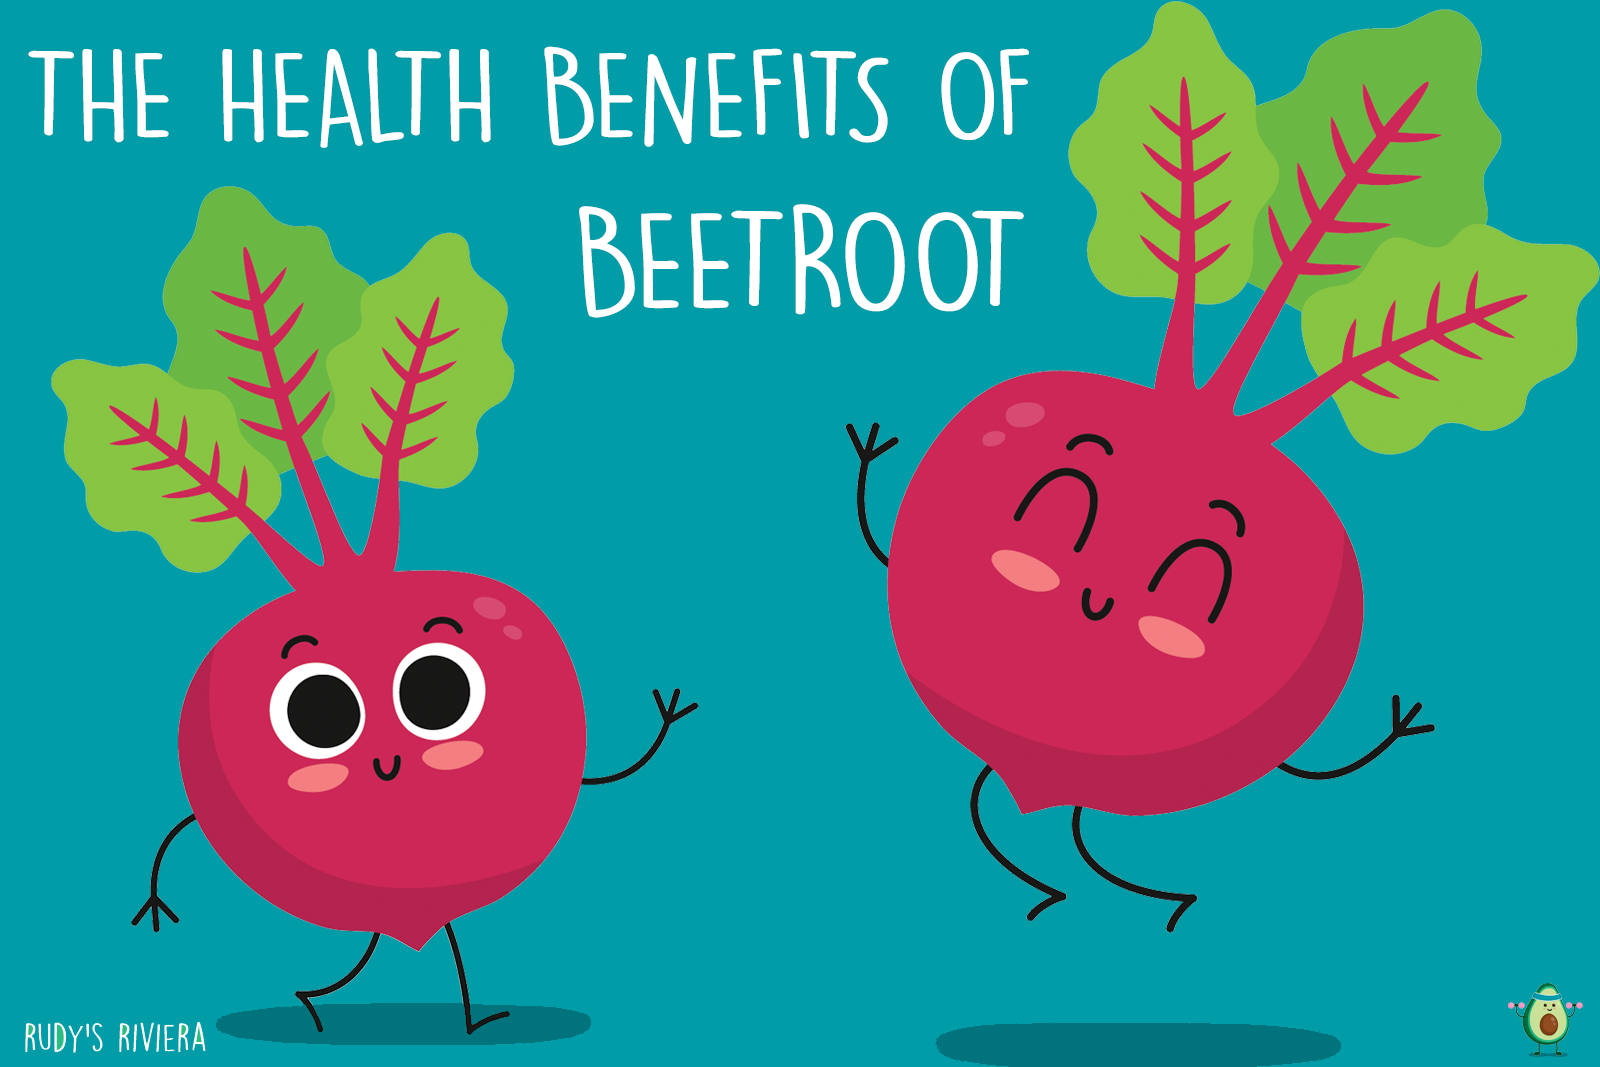 The health benefits of beetroot